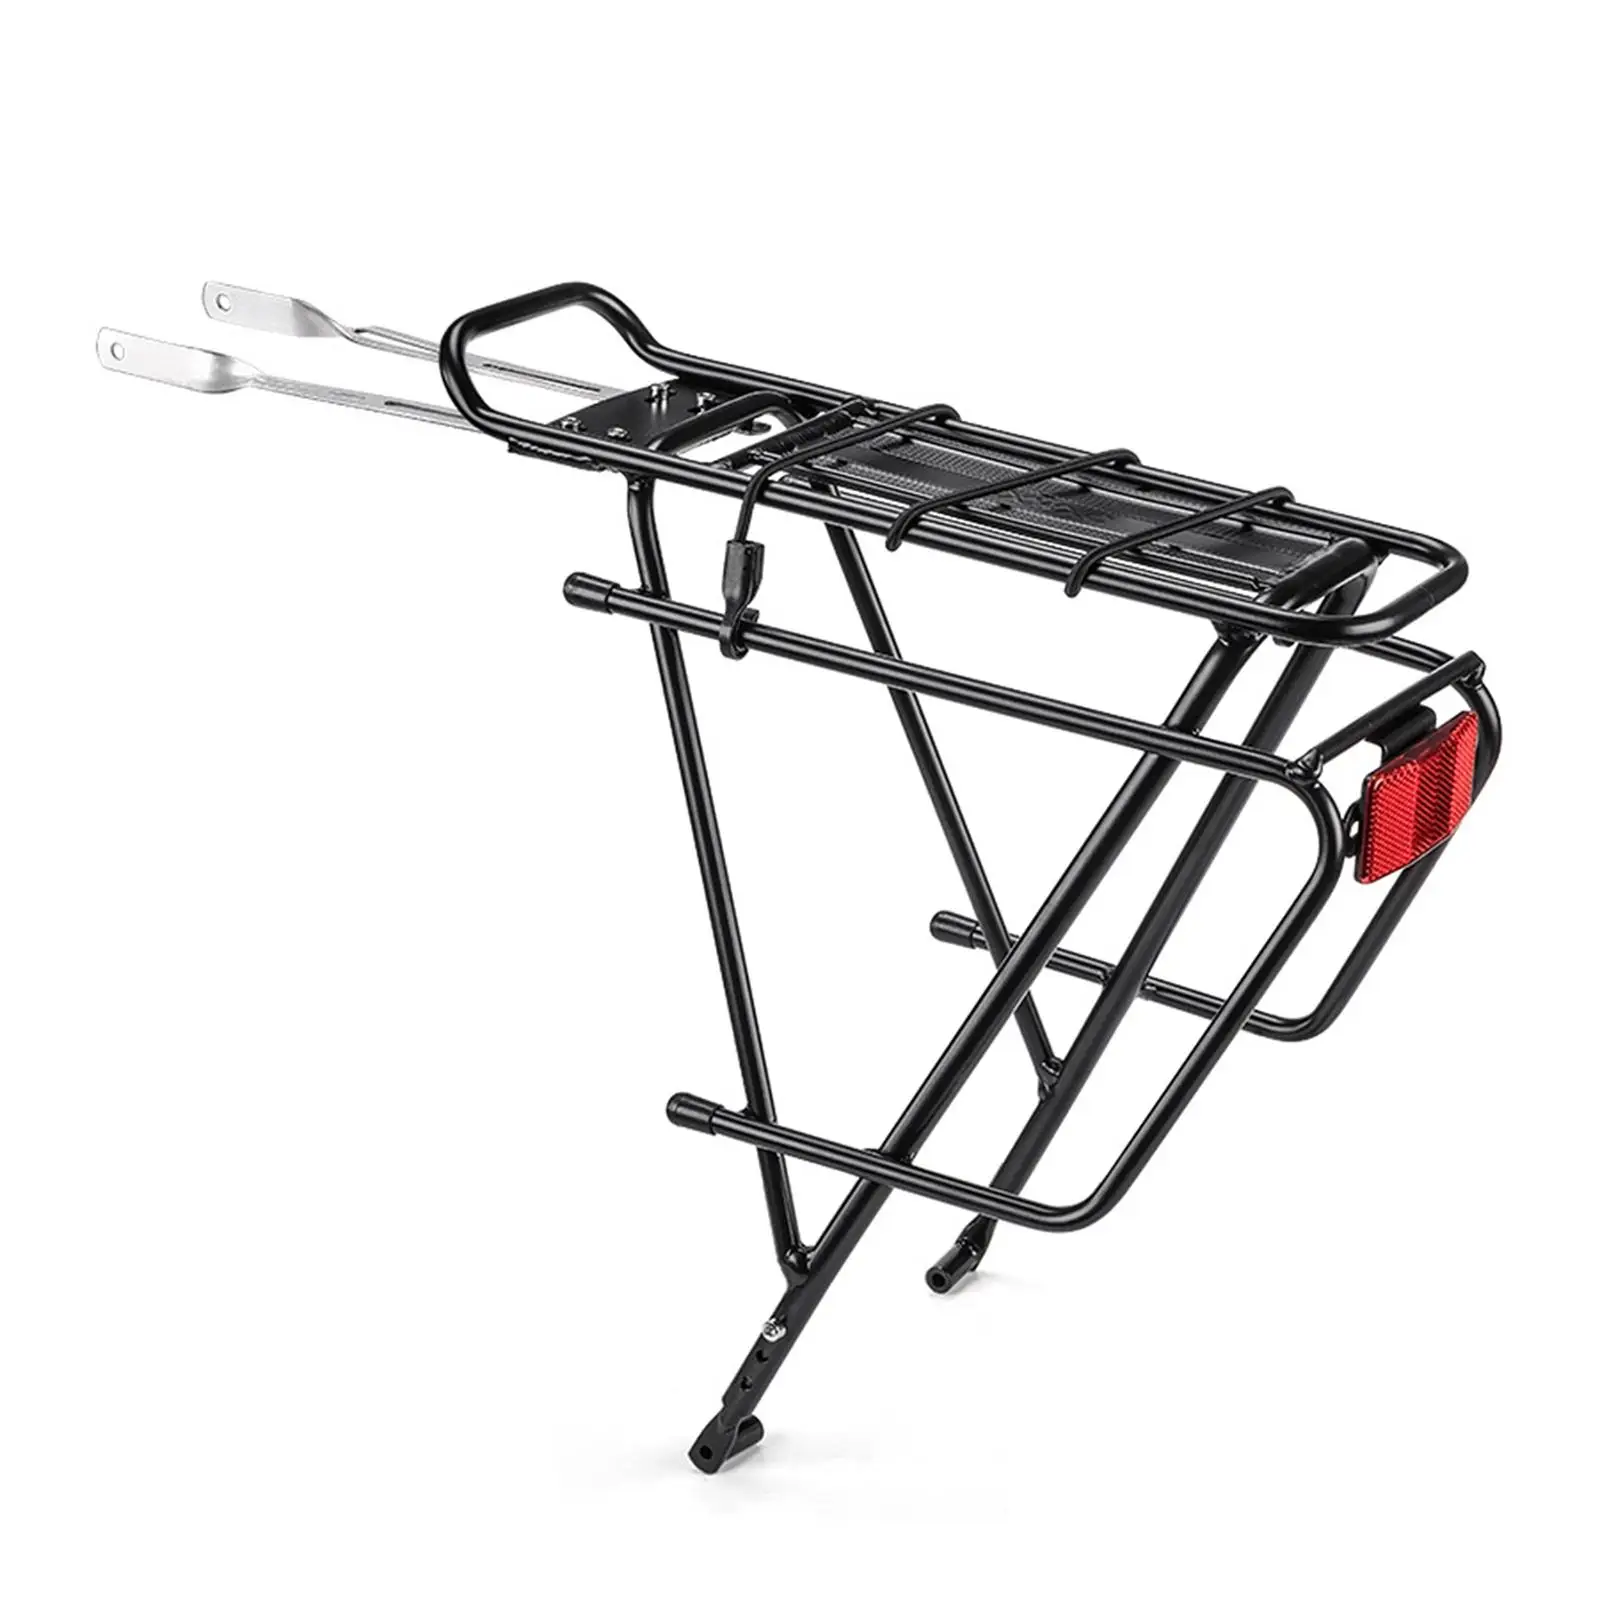 Bike Cargo Rack with Rope Bicycle Pannier Rack Durable Bicycle Touring Carrier for Mountain Bike Black Luggage Carrier Rack